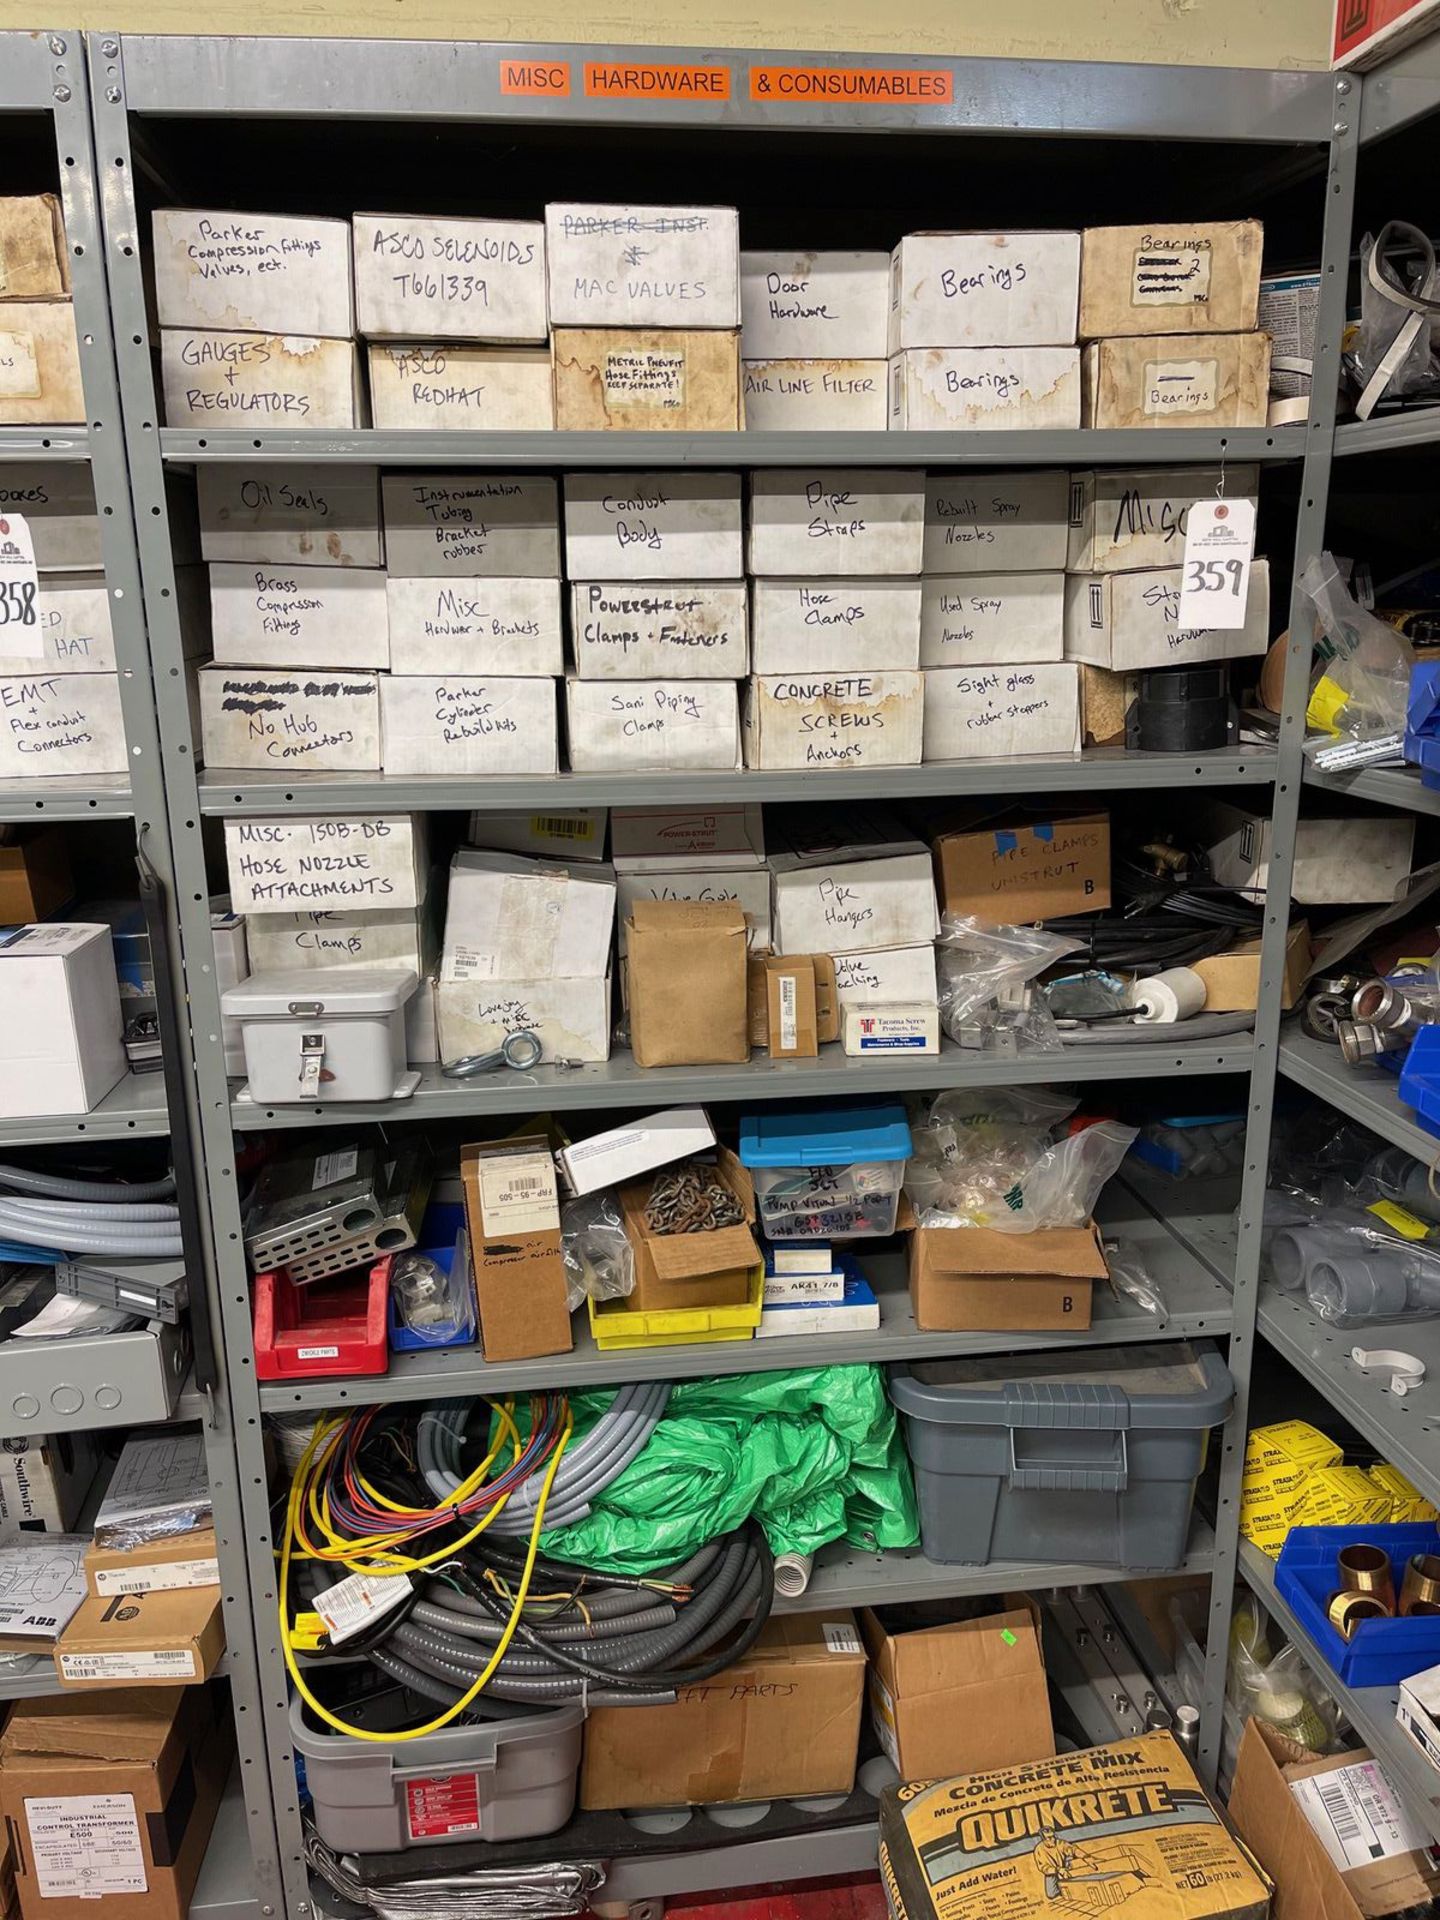 CONTENTS OF ENTIRE SHELVING UNIT LABELED MISC HARDWARE | Rig Fee: 100